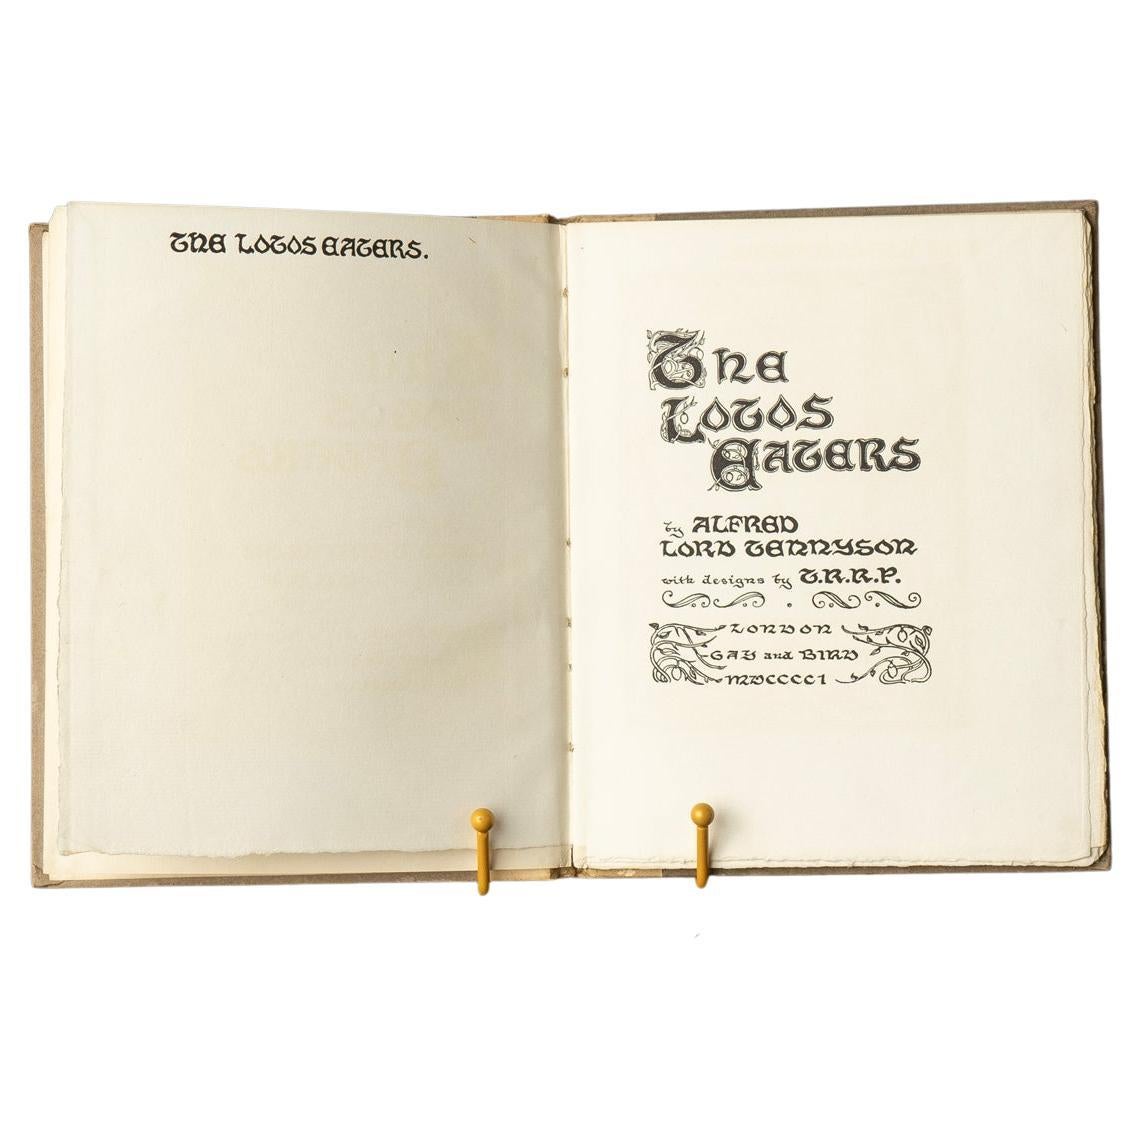 A rare edition of an estimated fifty produced on uncut vellum with the most beautiful art nouveau illuminations.

‘The Lotos Eaters’ is a poem written by Tennyson after a trip to Spain which was based on Homer’s Odyssey.

Published by Gay &